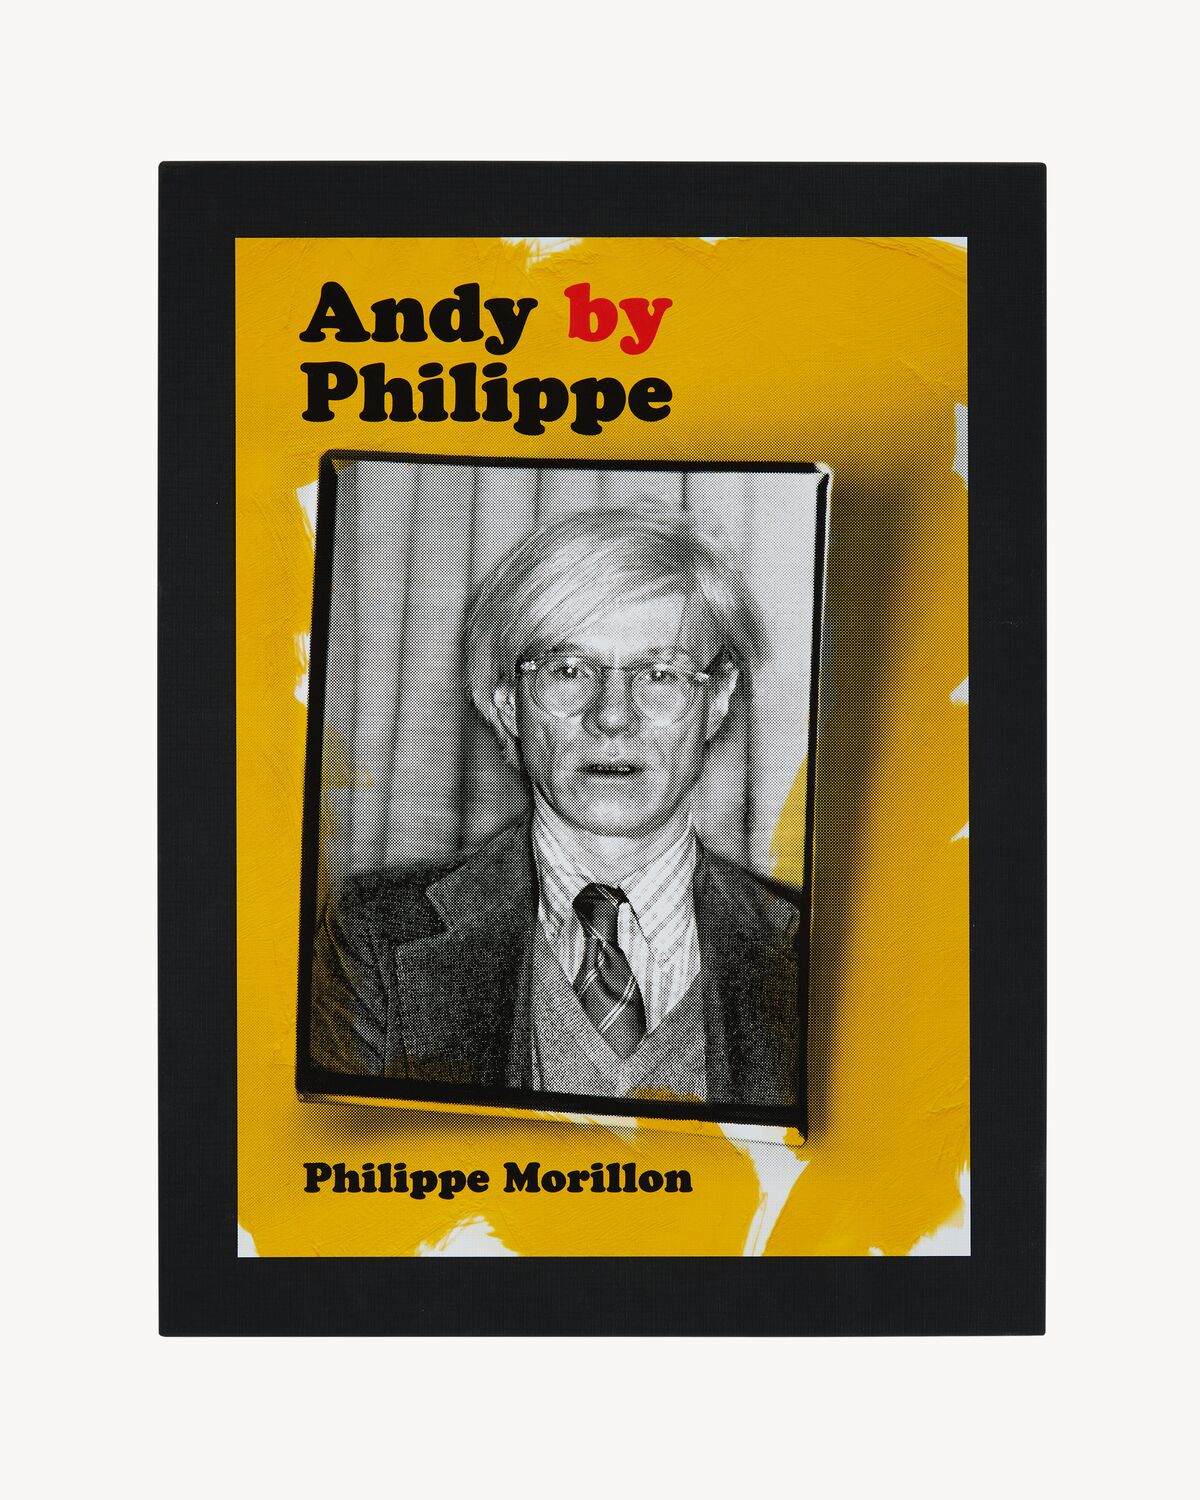 Andy by Philippe